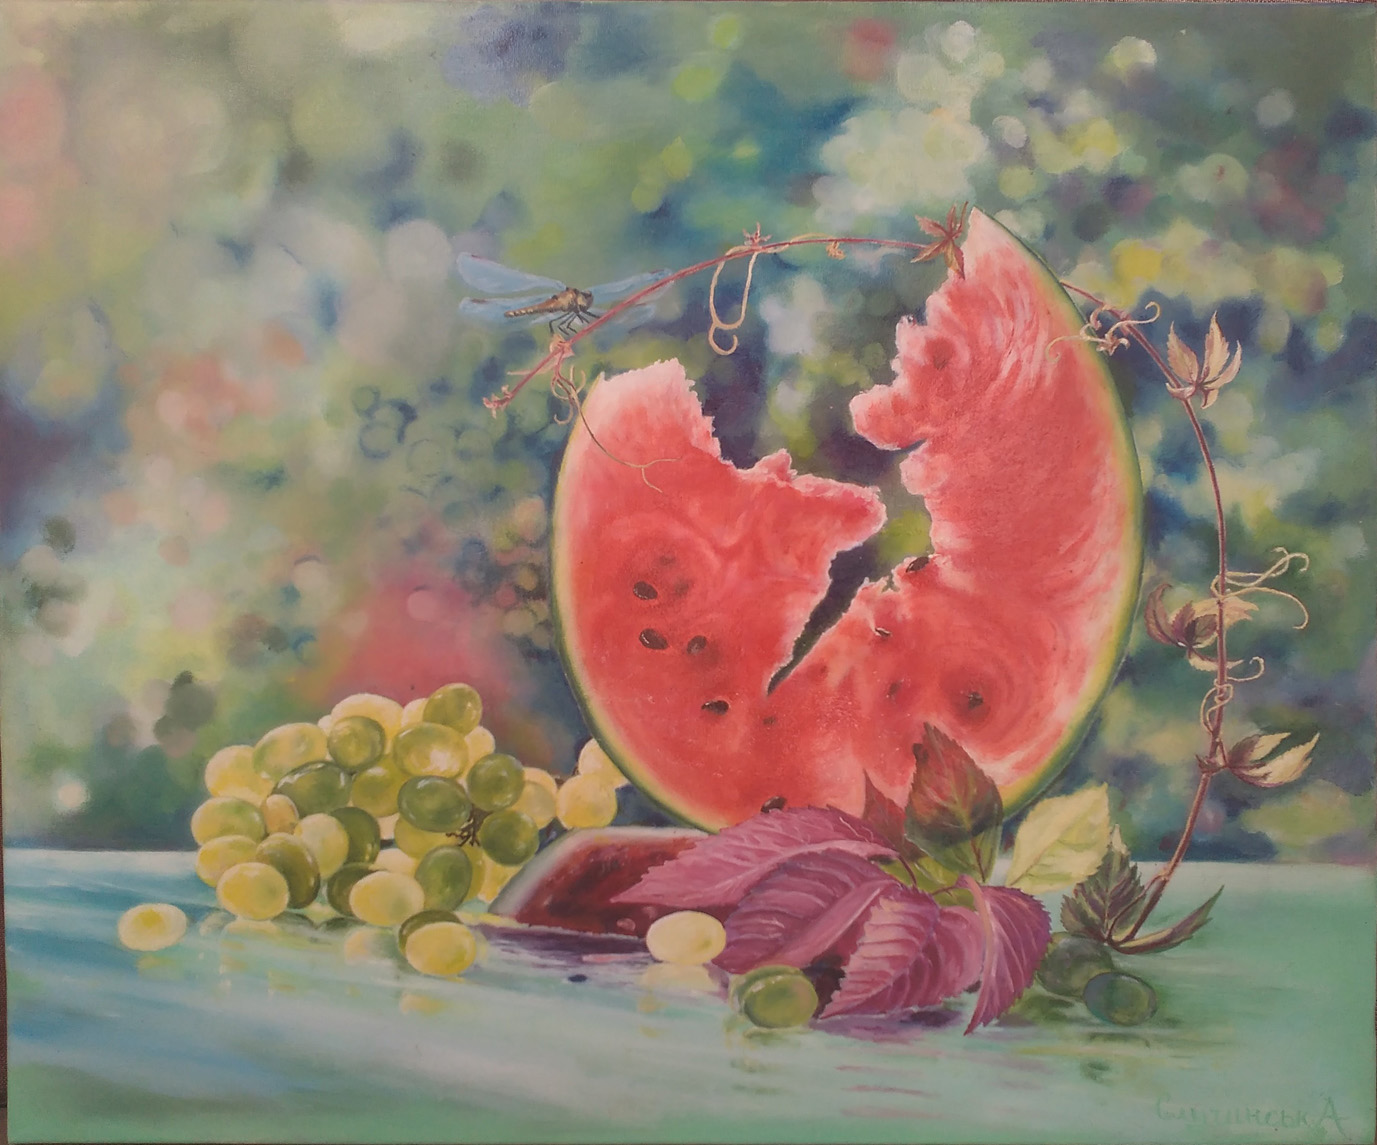 Painting Watermelon and grapes